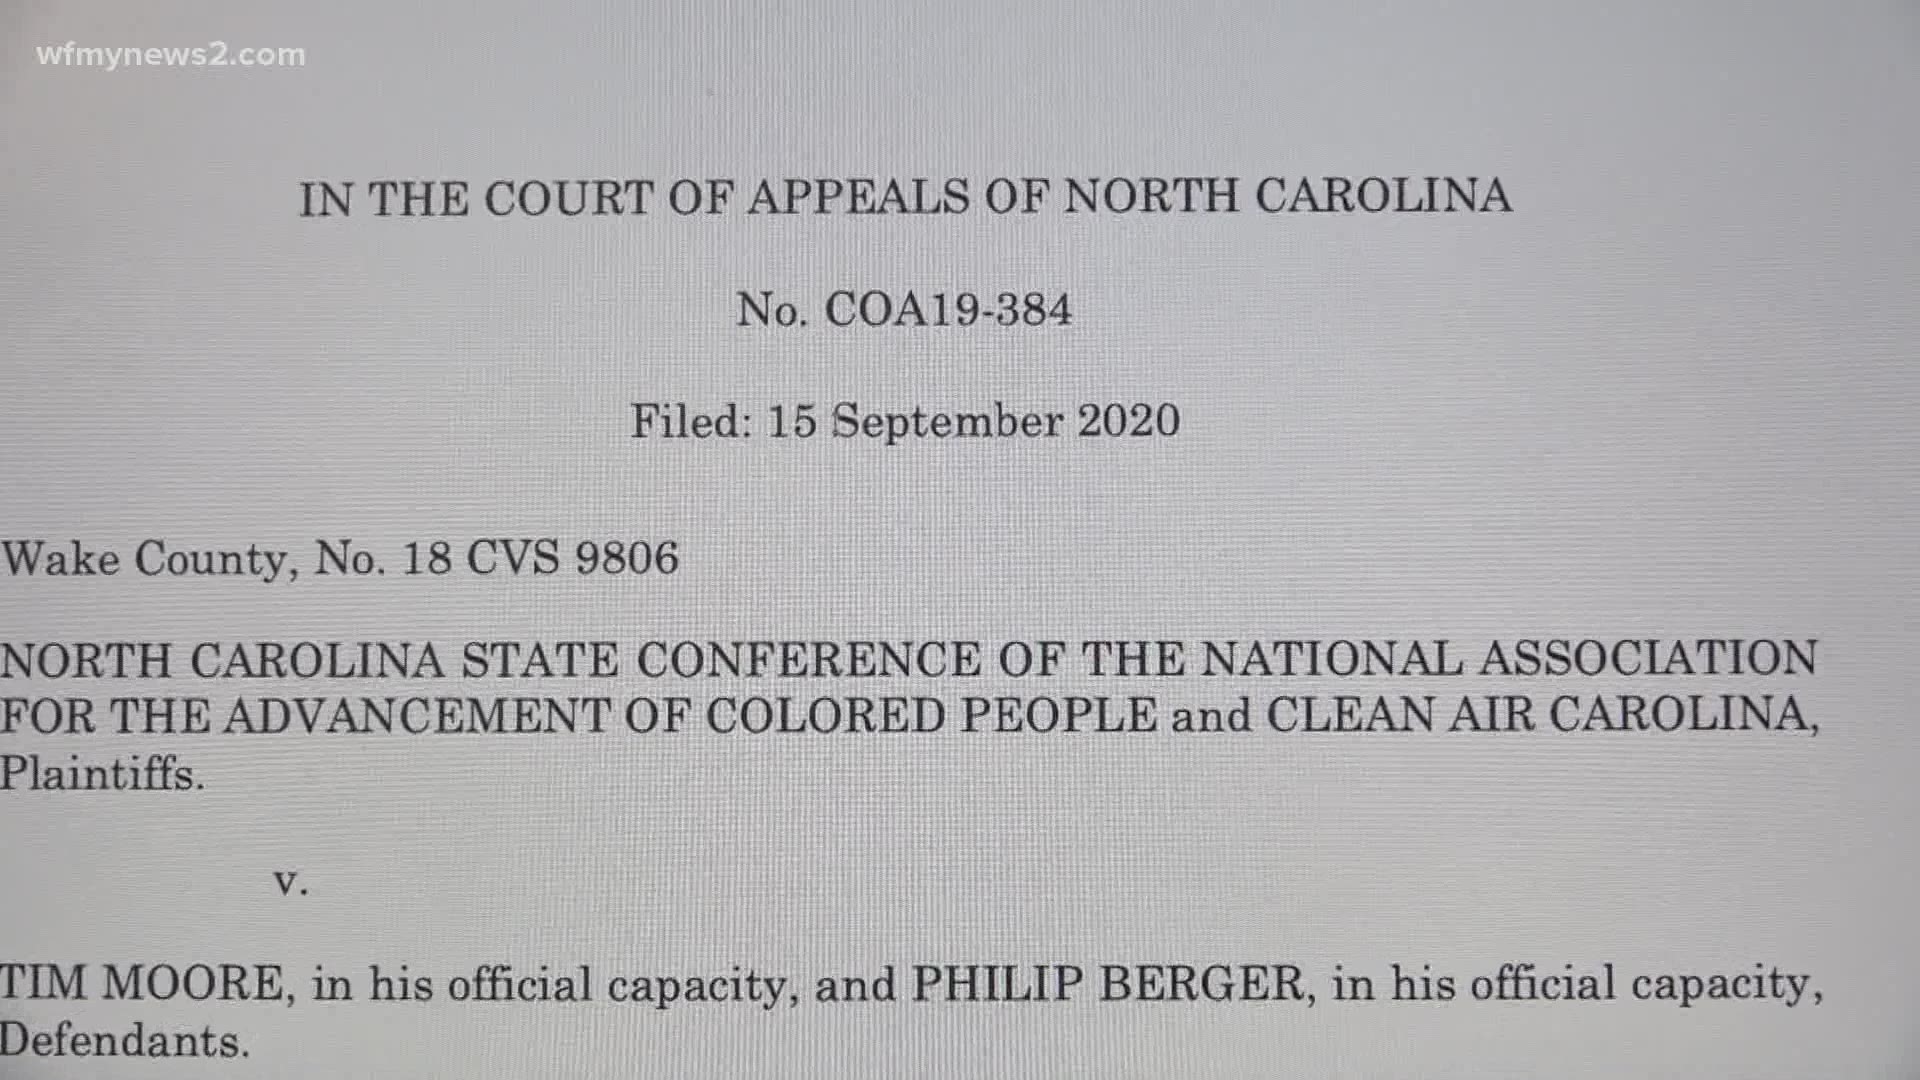 The NC Court of Appeals has reversed a 2018 constitutional amendment ruling. This means changes could come to Voter ID laws, but not for the 2020 election.